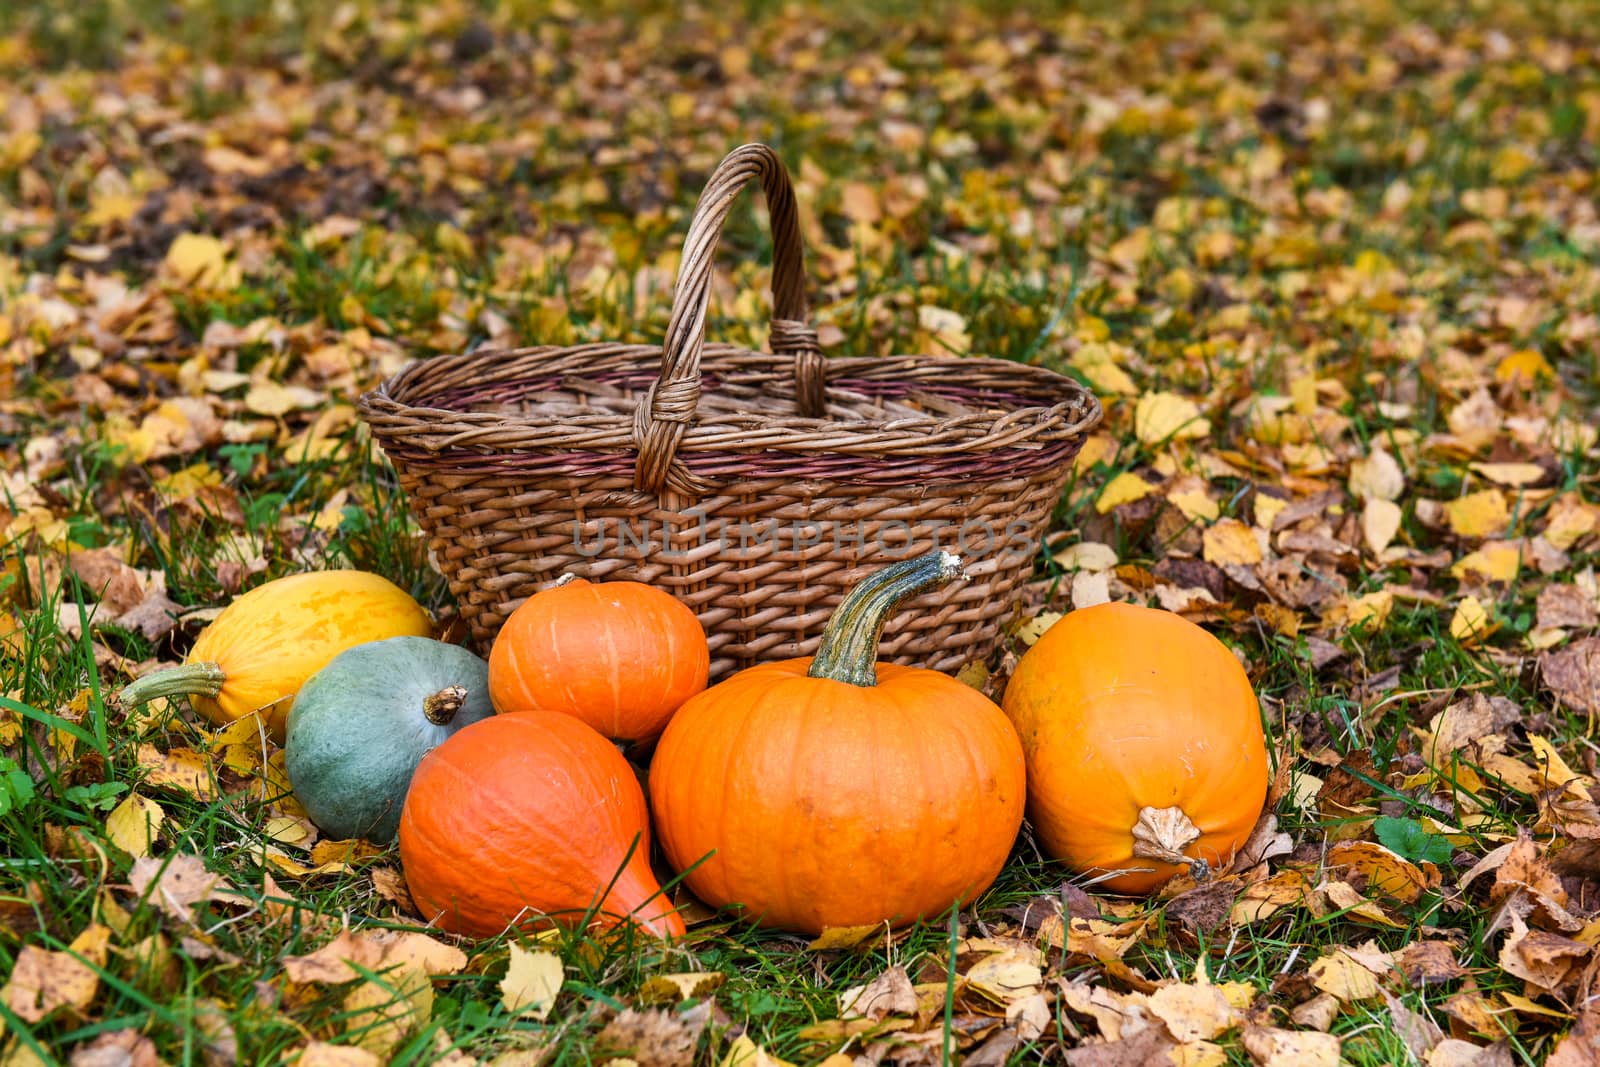 orange pumpkins ad basket against the background of autumn foliage by infinityyy